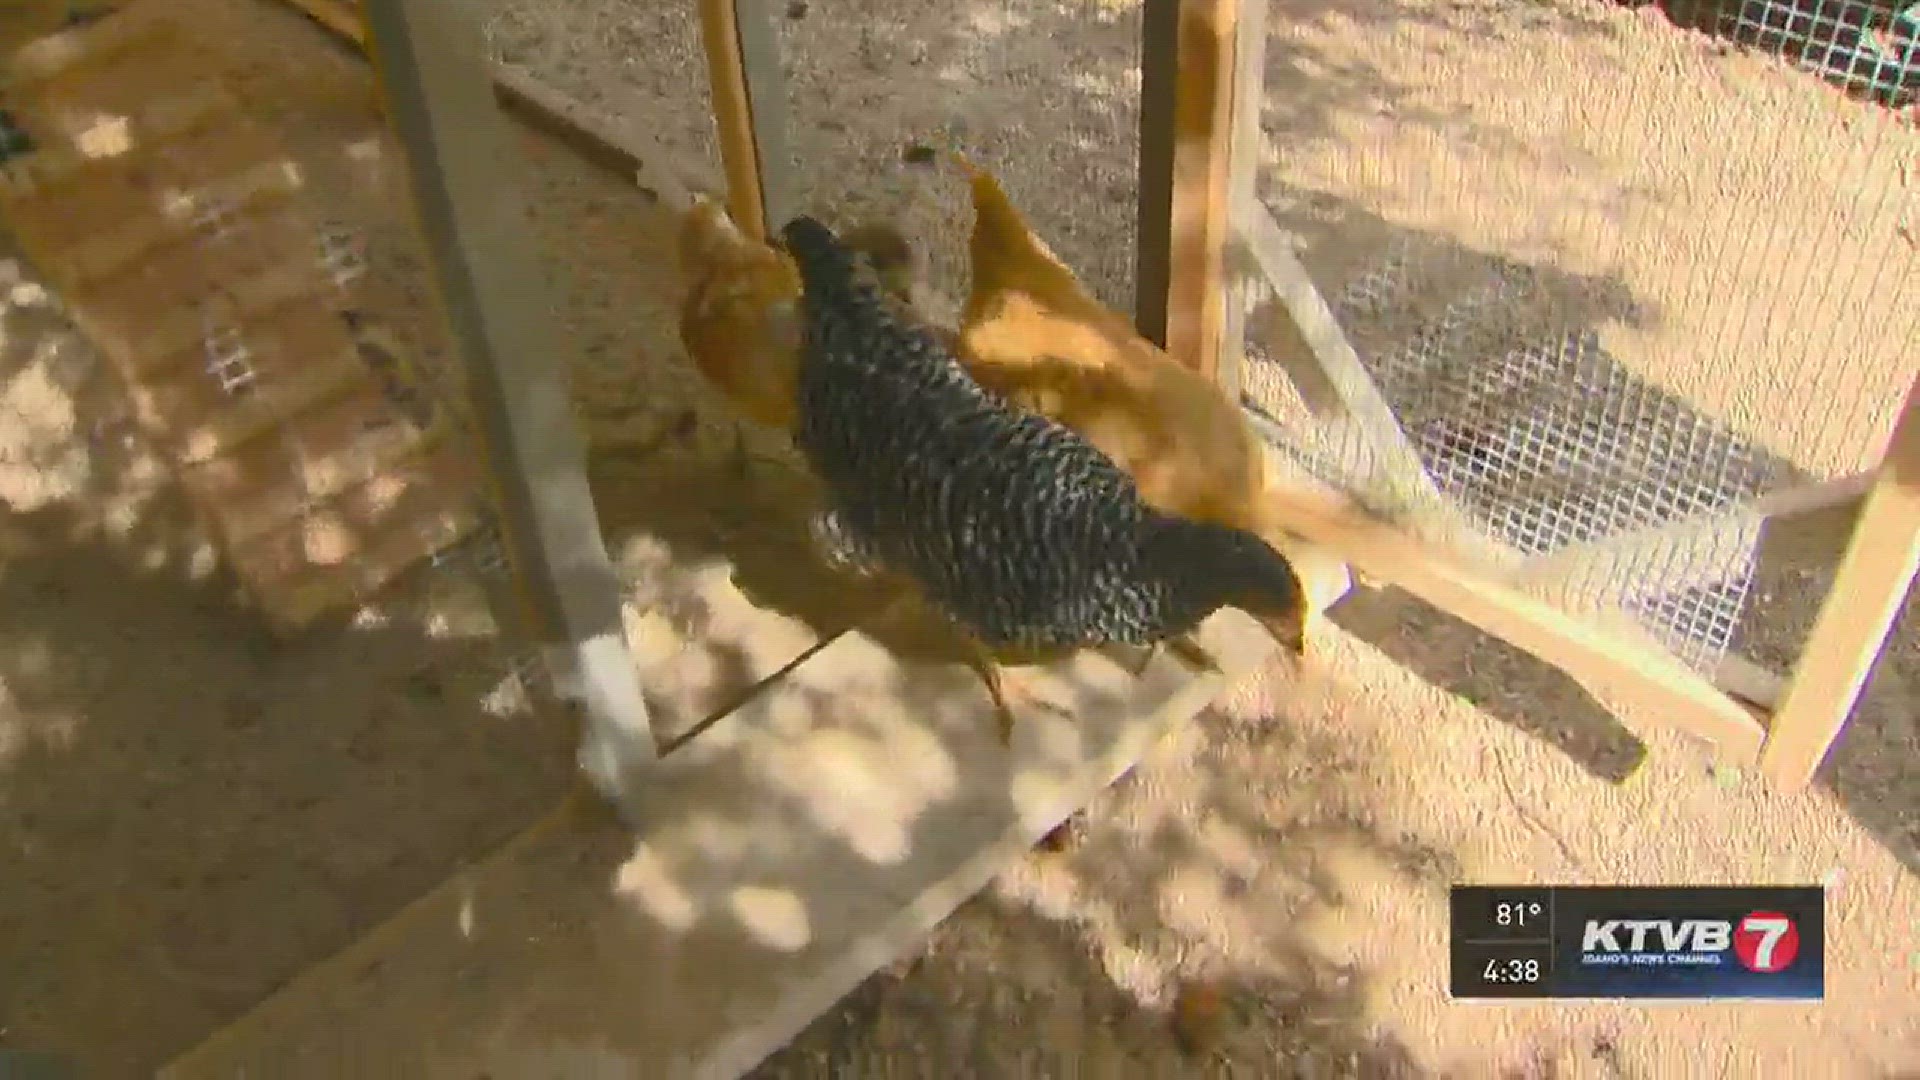 Jim Duthie shows how to raise backyard chickens.